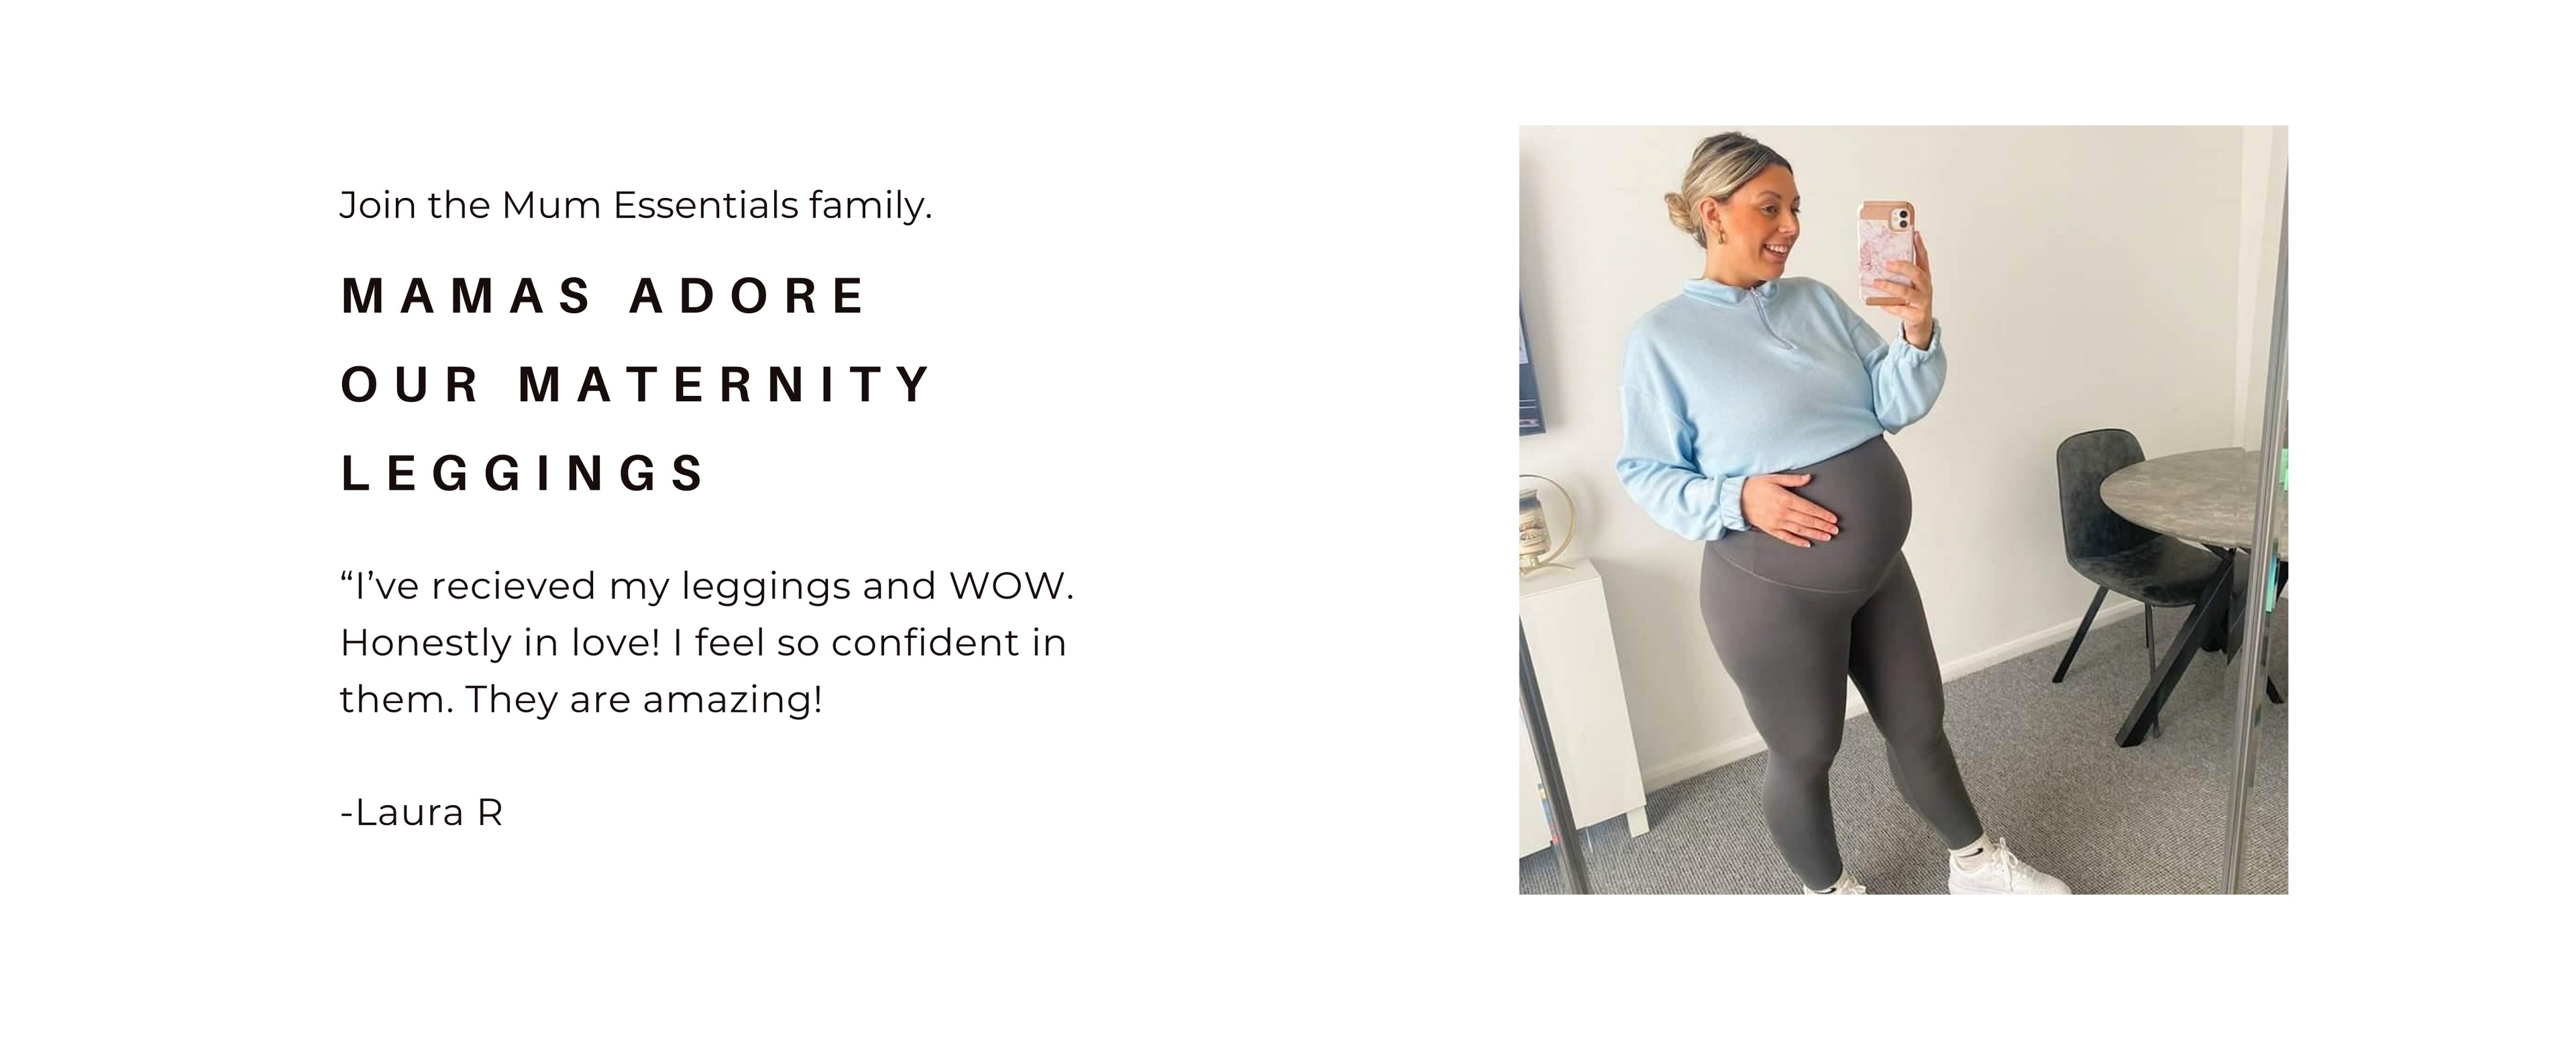 "An expectant mother confidently wearing grey maternity leggings, showcasing comfort and style during pregnancy."